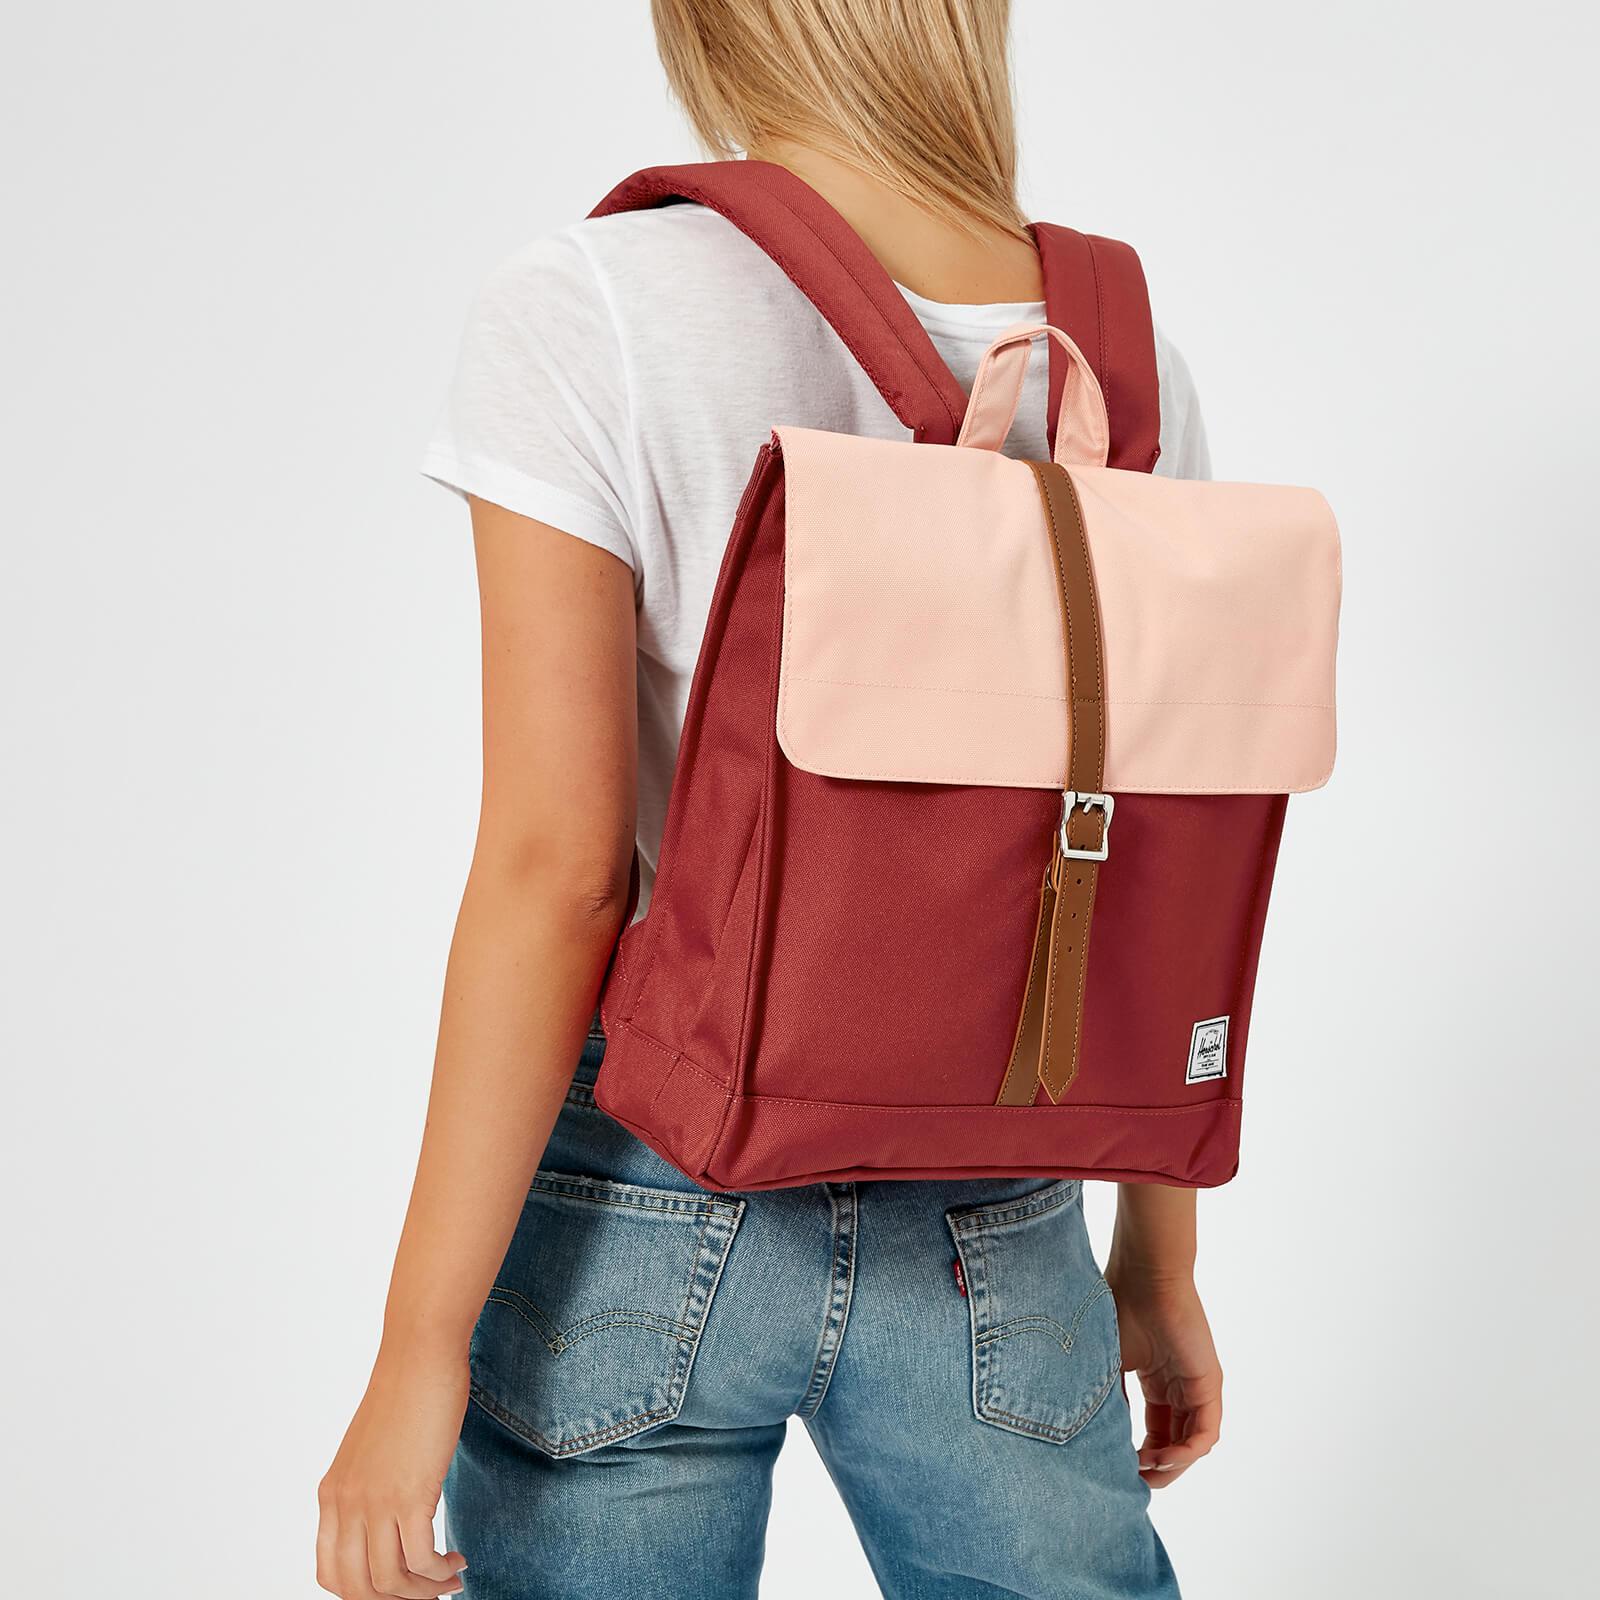 Herschel Supply Co. Canvas City Mid-volume Backpack in Red - Lyst